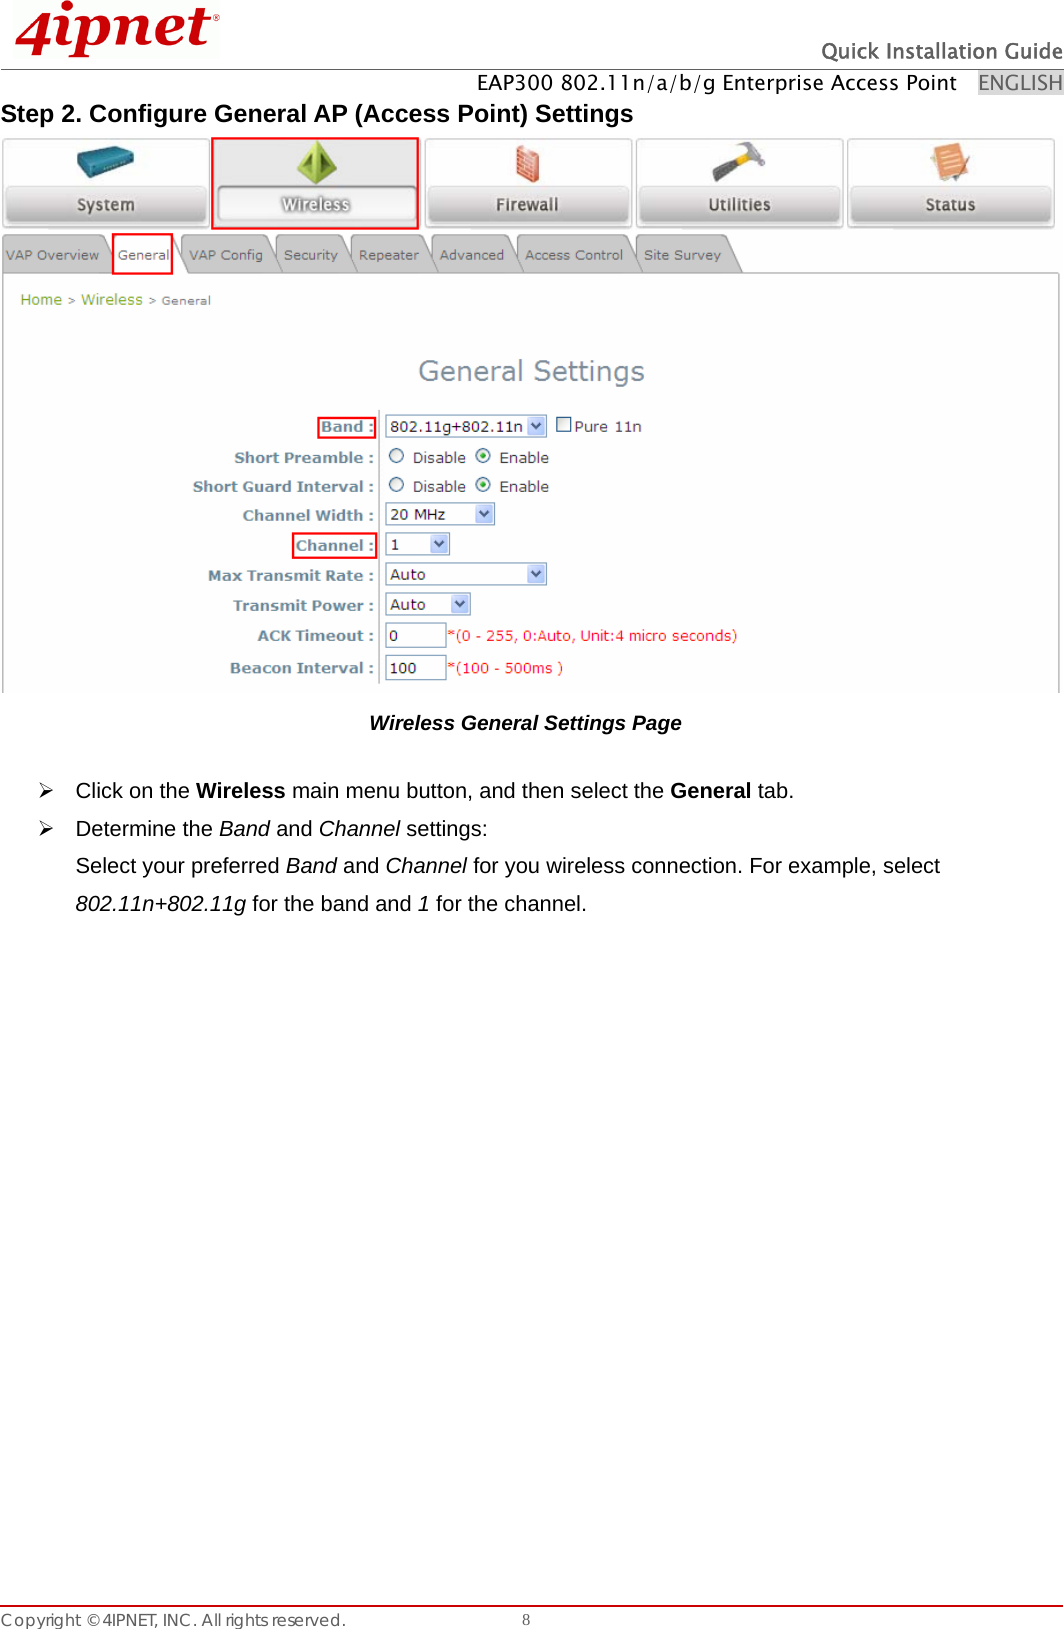  Quick Installation Guide EAP300 802.11n/a/b/g Enterprise Access Point    ENGLISH Copyright © 4IPNET, INC. All rights reserved.    8Step 2. Configure General AP (Access Point) Settings  Wireless General Settings Page ¾  Click on the Wireless main menu button, and then select the General tab. ¾ Determine the Band and Channel settings: Select your preferred Band and Channel for you wireless connection. For example, select 802.11n+802.11g for the band and 1 for the channel.   